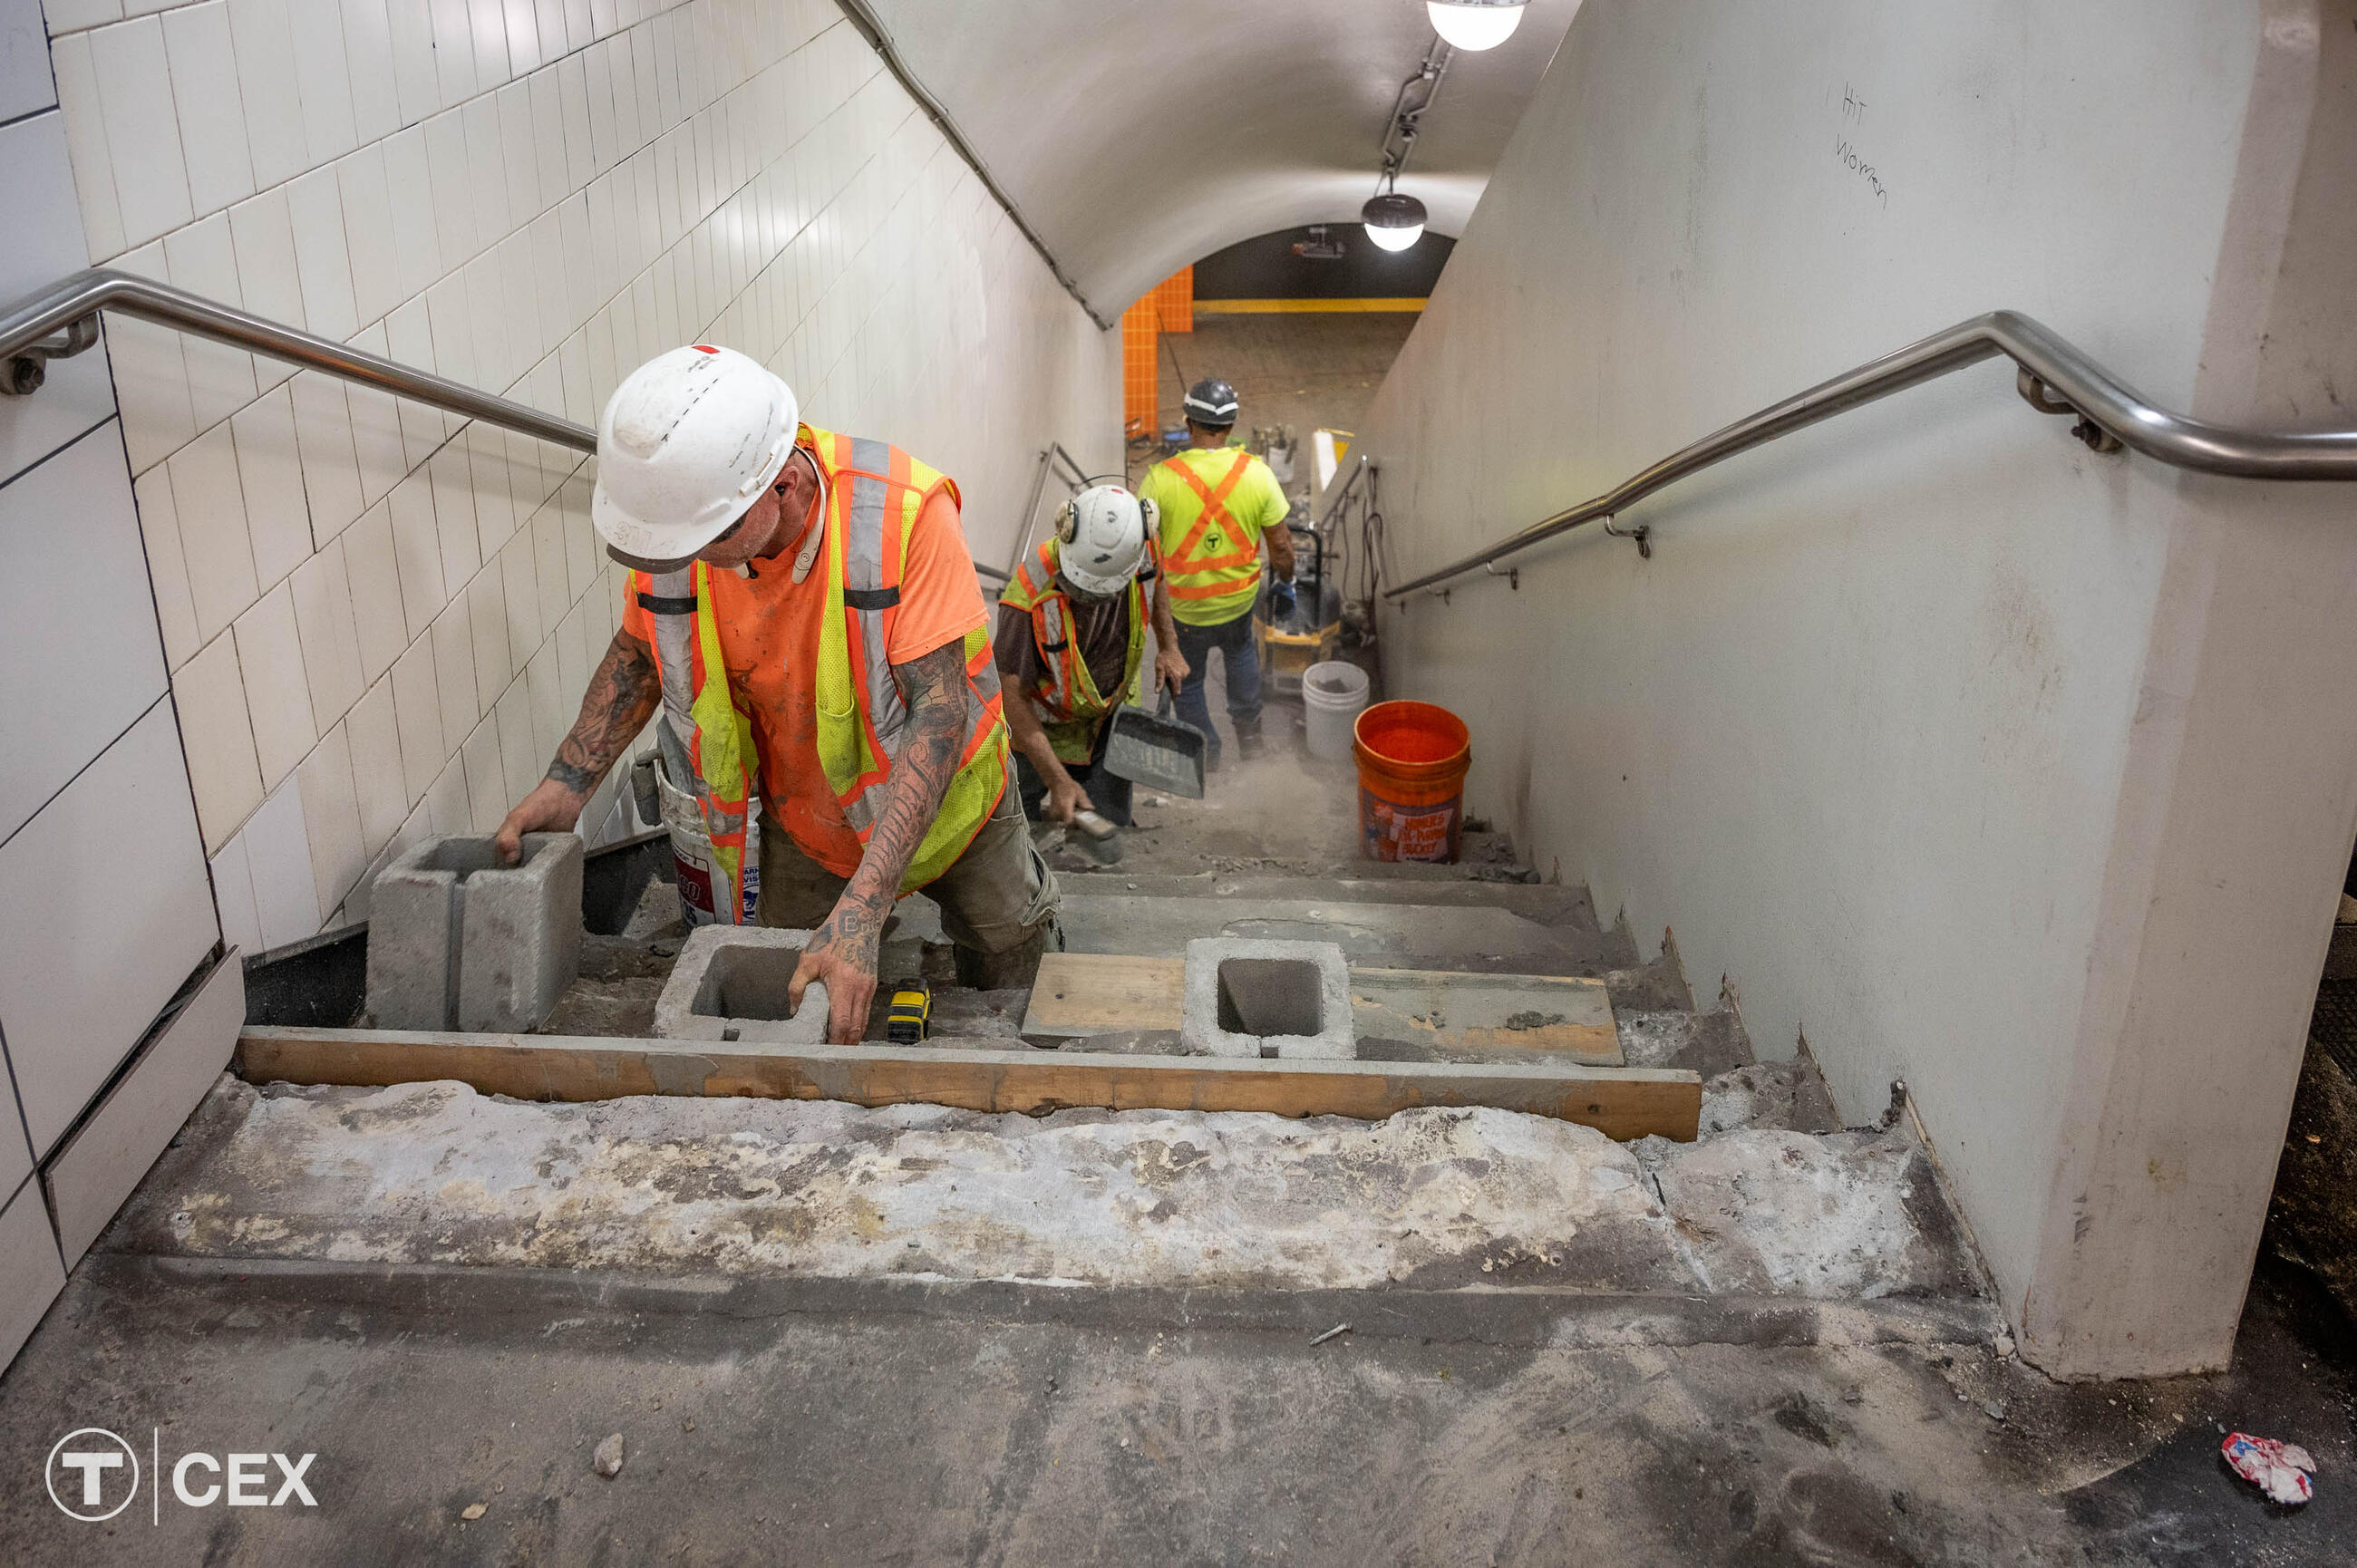 Crews also performed stairwell replacement work at stations throughout the Orange Line. Complimentary photo by the MBTA Customer and Employee Experience Department.